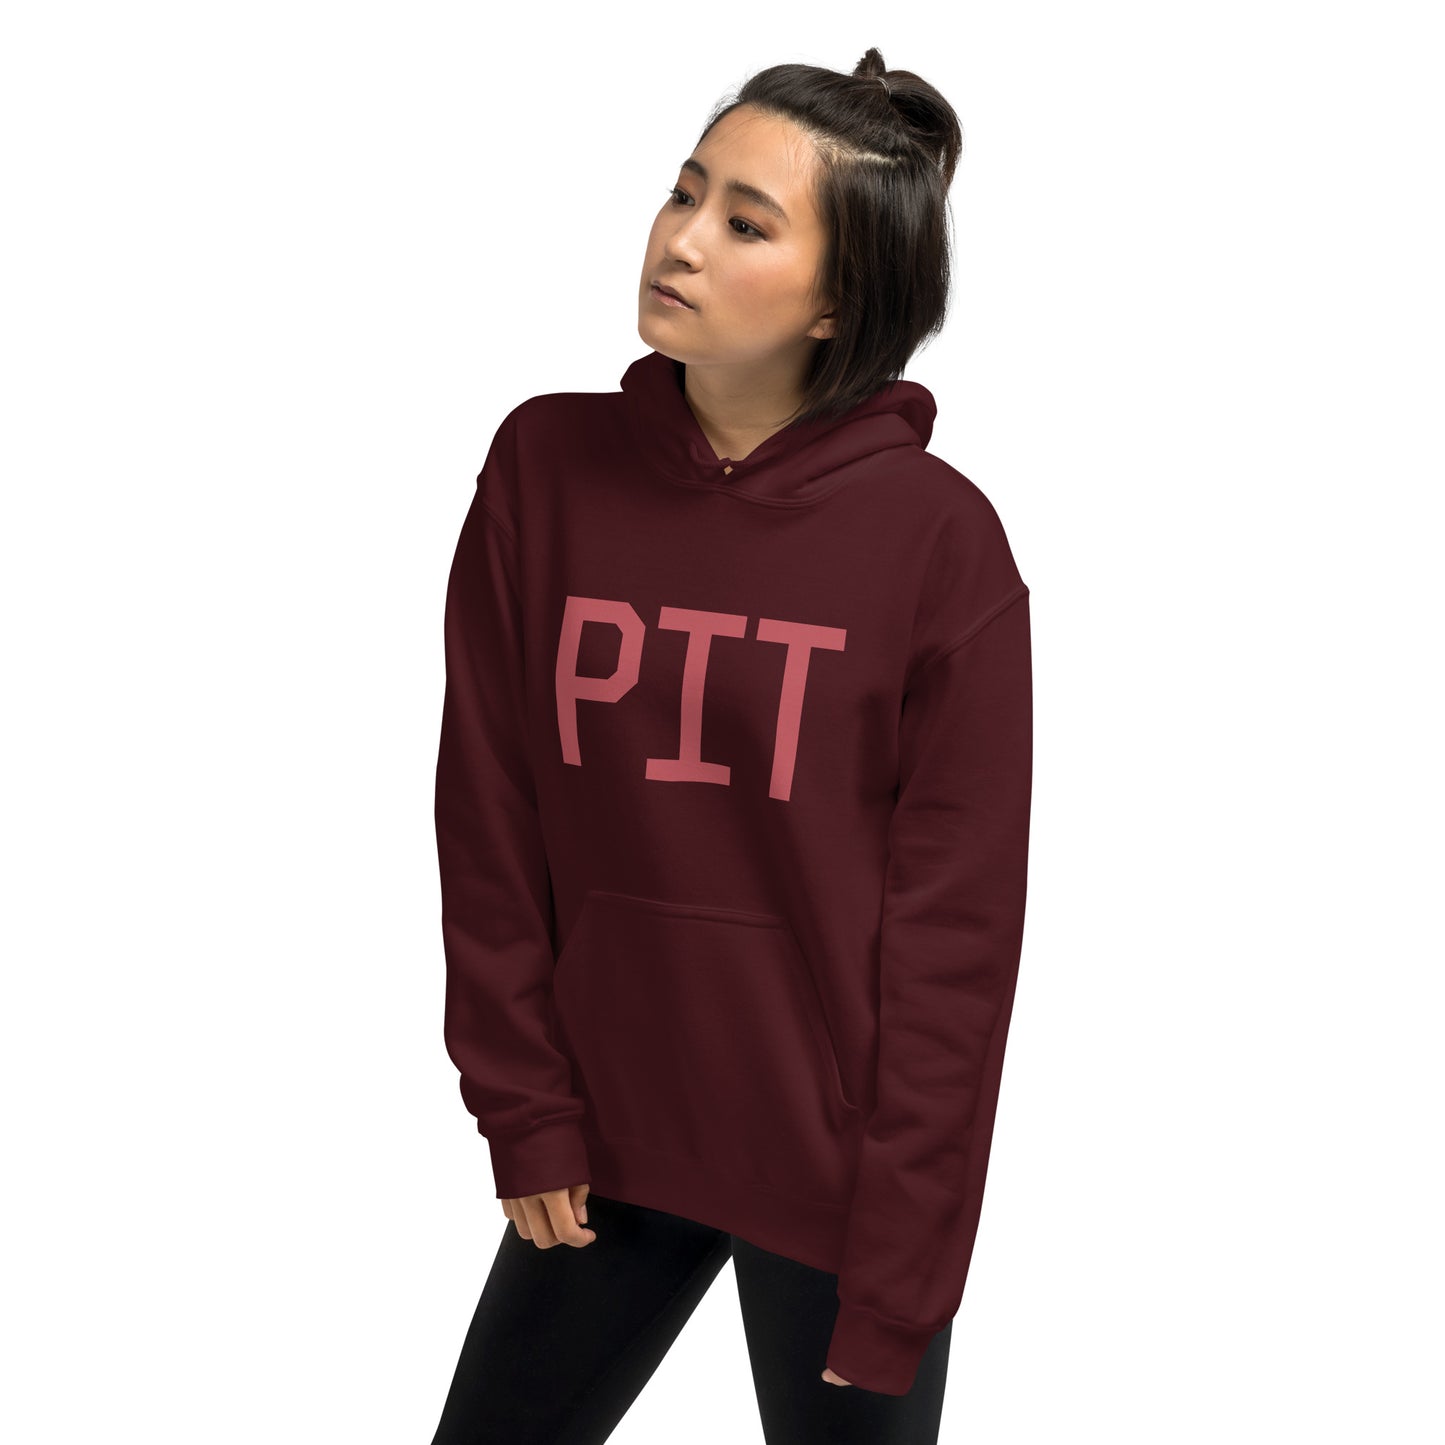 Aviation Enthusiast Hoodie - Deep Pink Graphic • PIT Pittsburgh • YHM Designs - Image 10